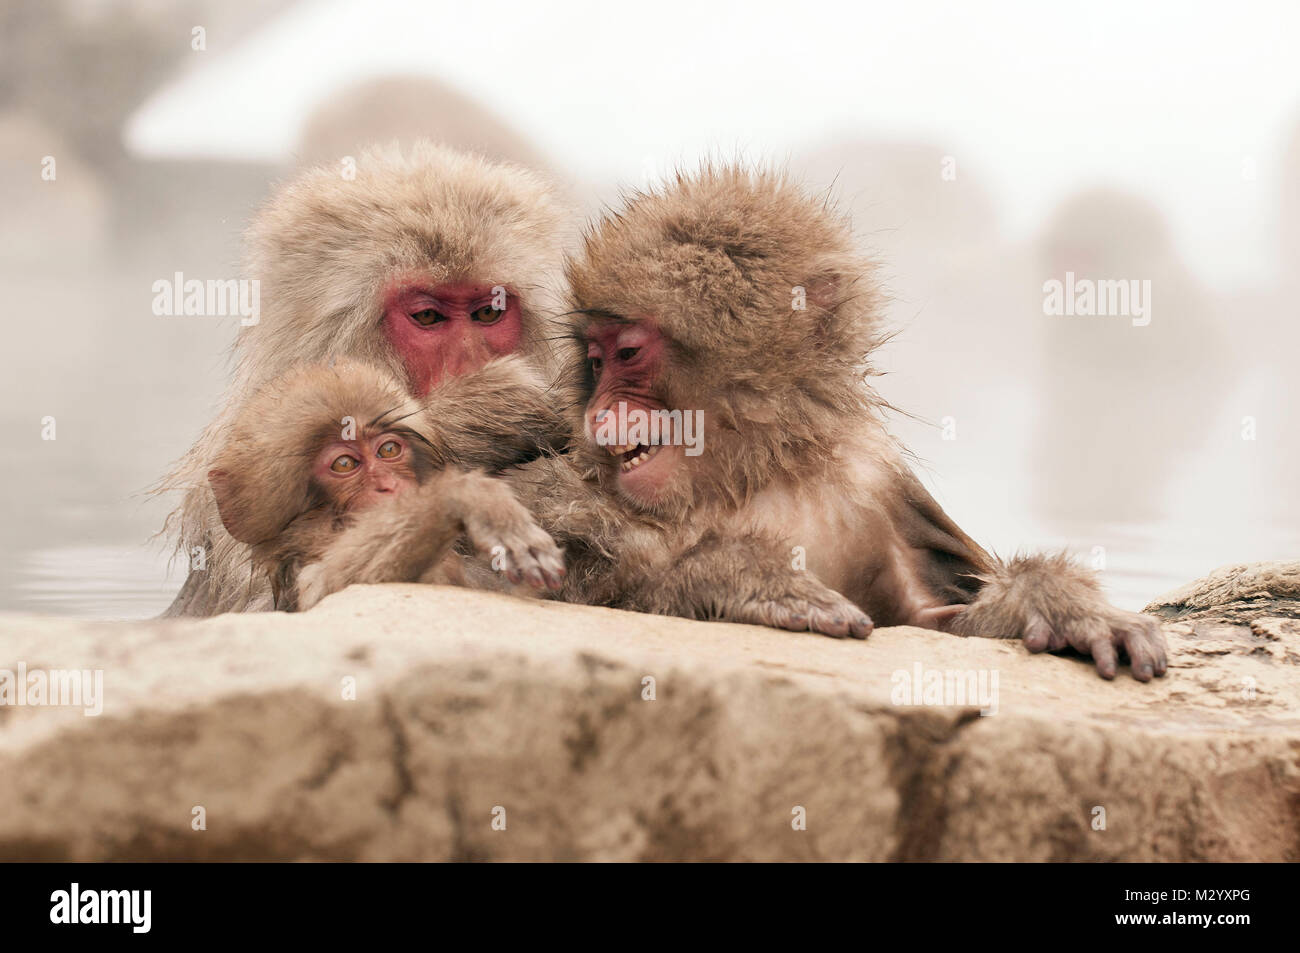 Macaque giapponese o neve giapponese monkey (Macaca fuscata) famiglia in onsen, Giappone Foto Stock